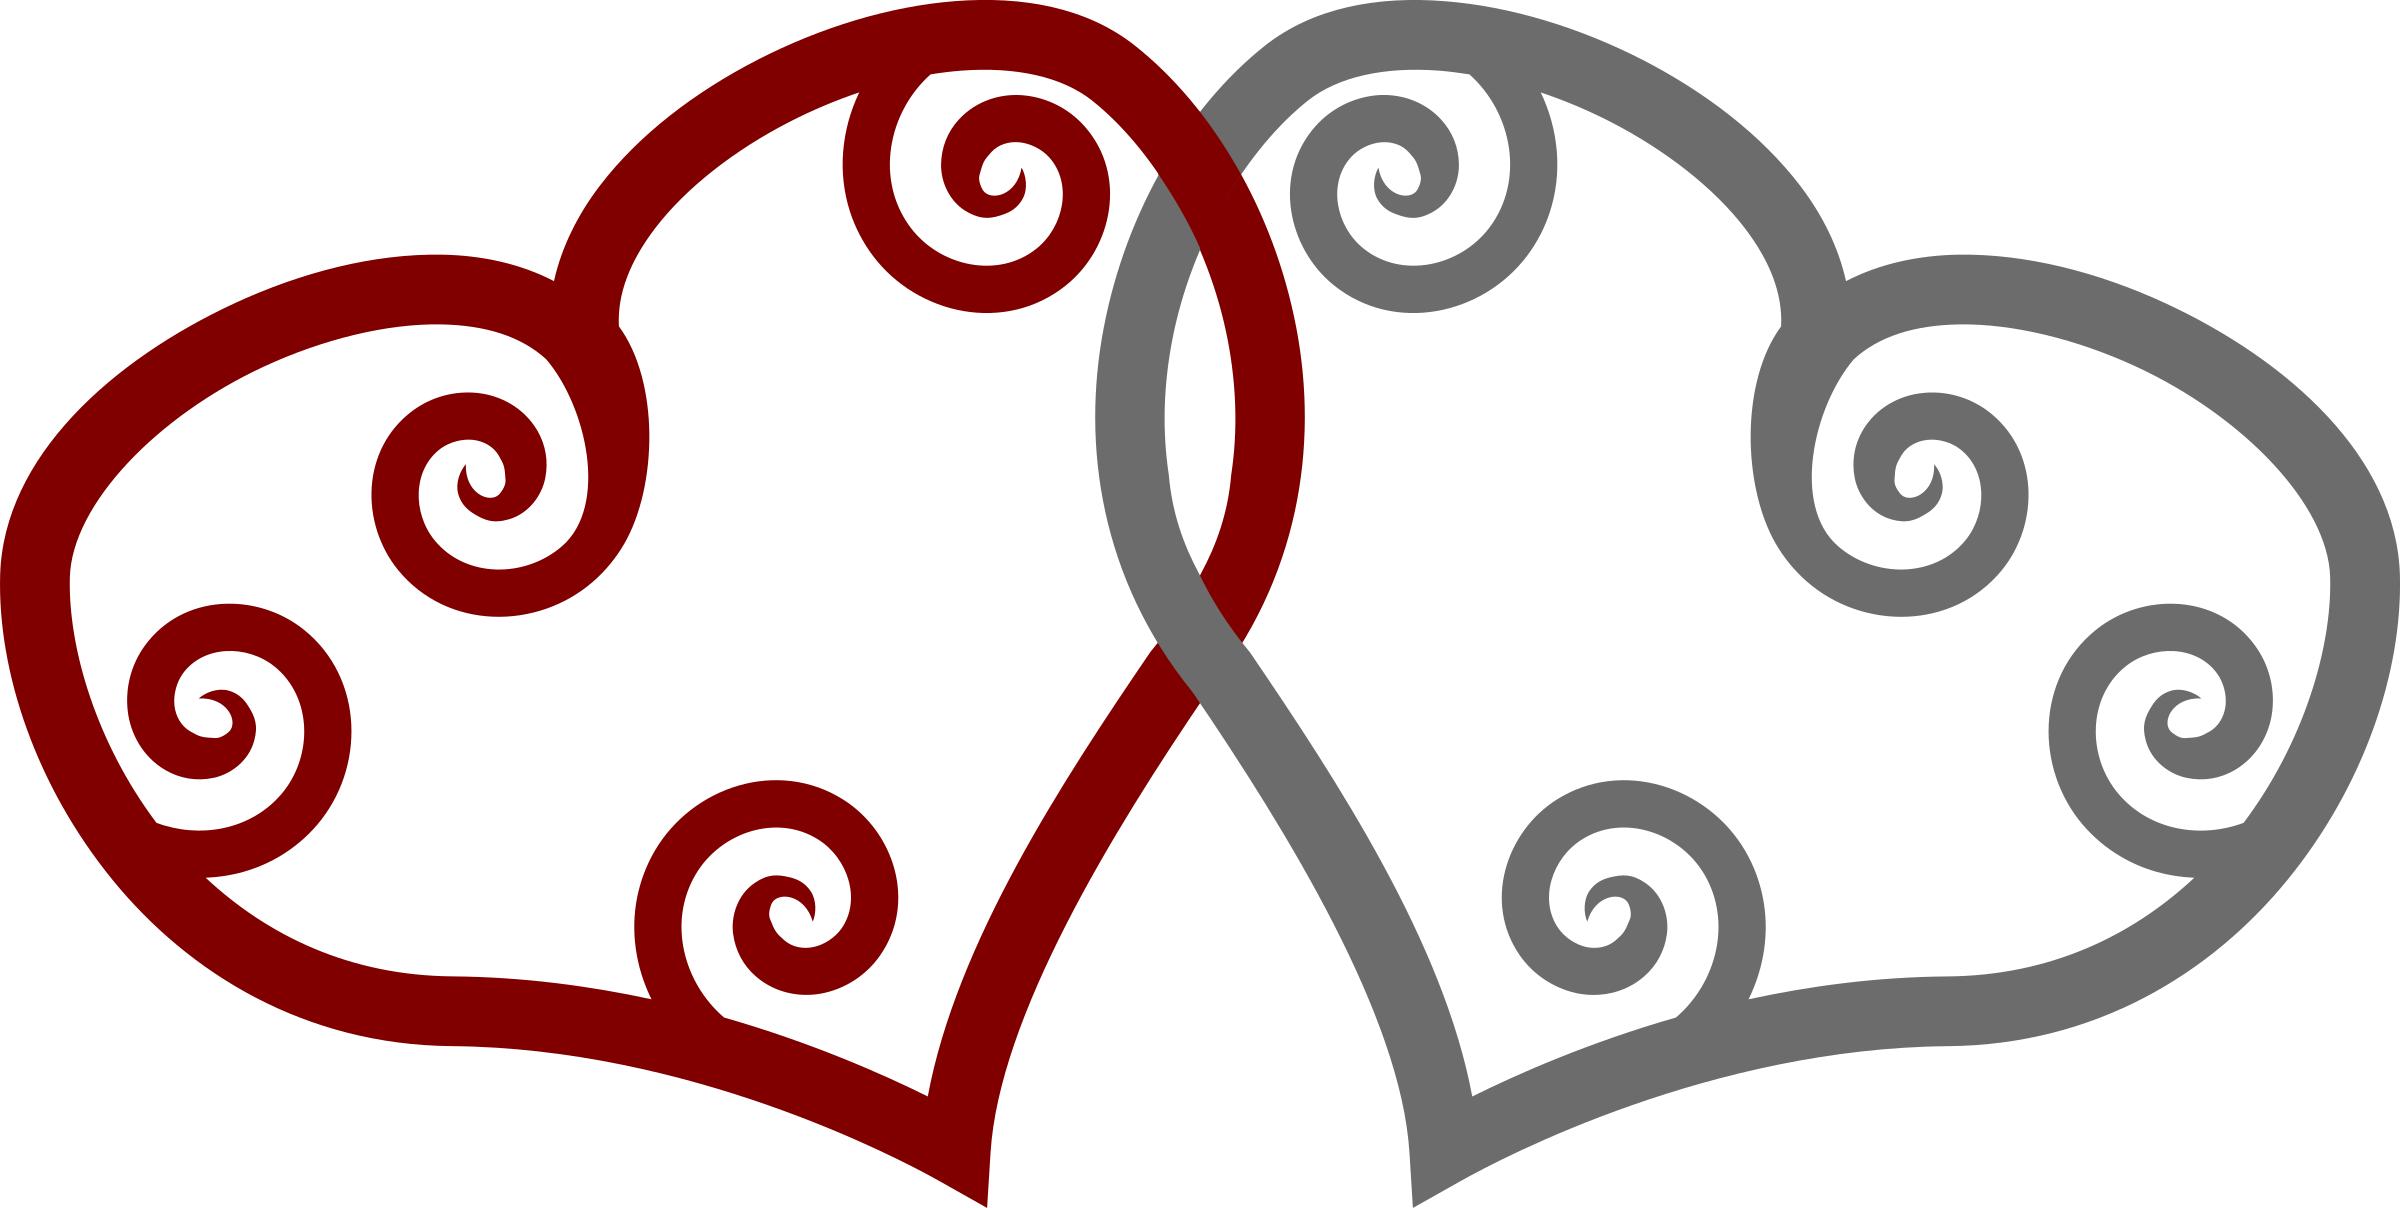 Red & Silver Maori Hearts Interlinked icons